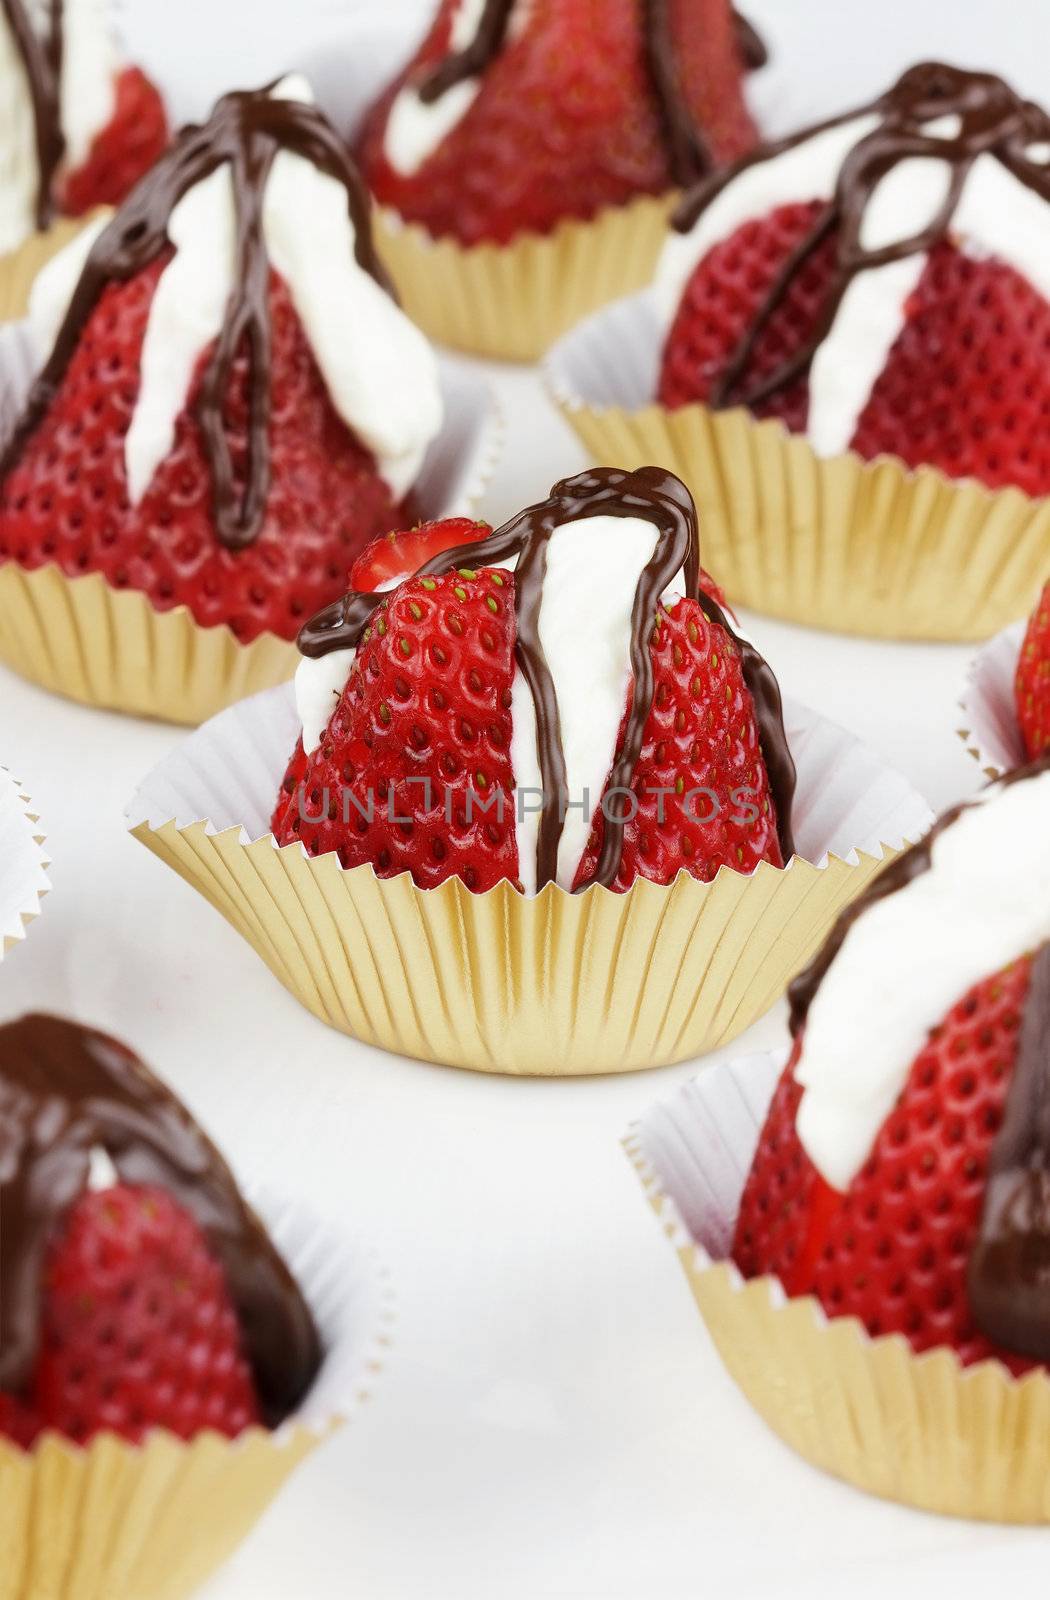 Strawberries filled with white chocolate and then drizzled
